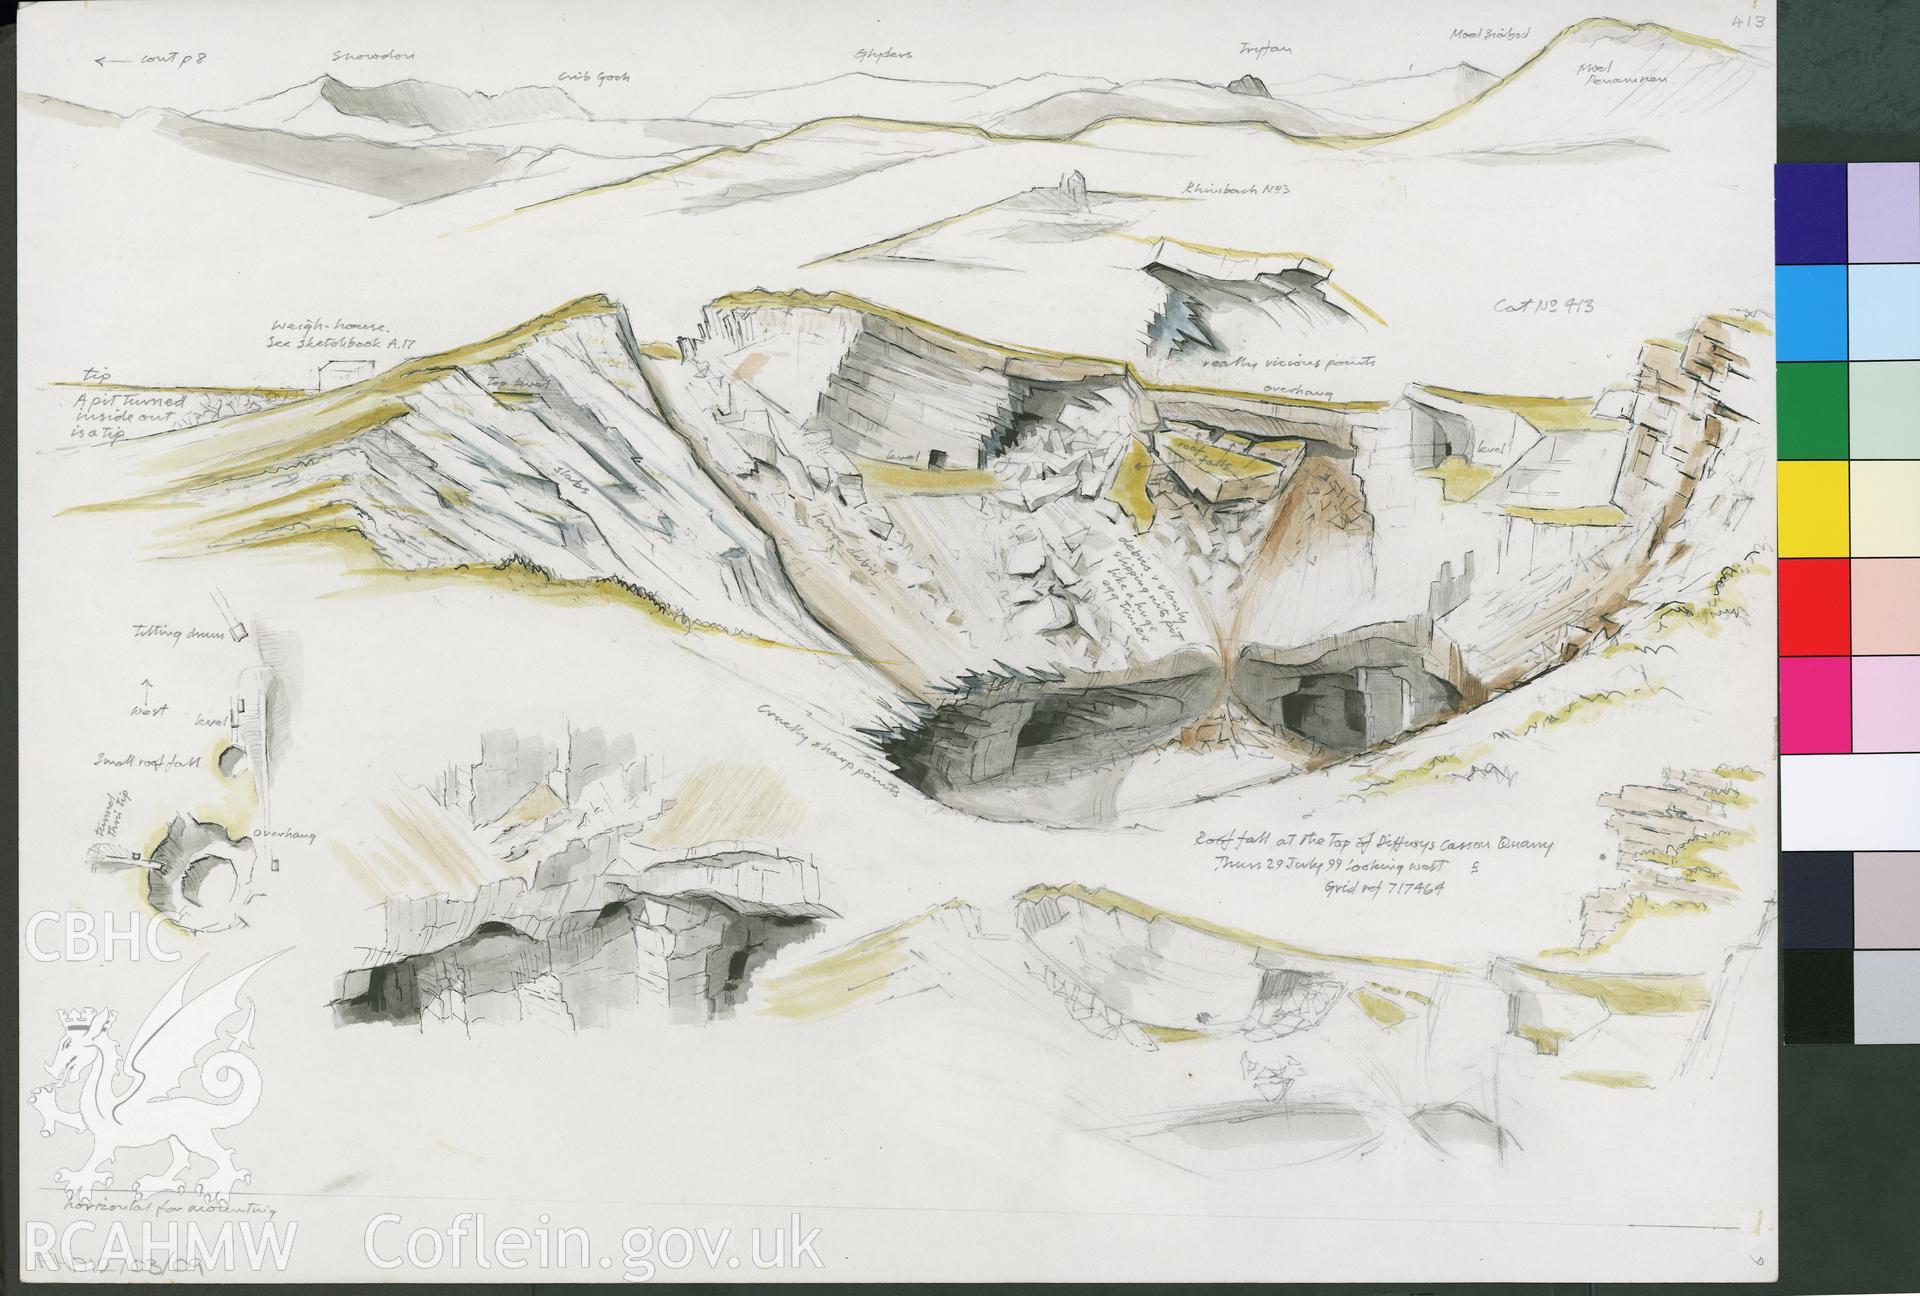 Watercolour showing rockfall at Diffwys Casson Quarry, produced by Falcon Hildred, July 1999.